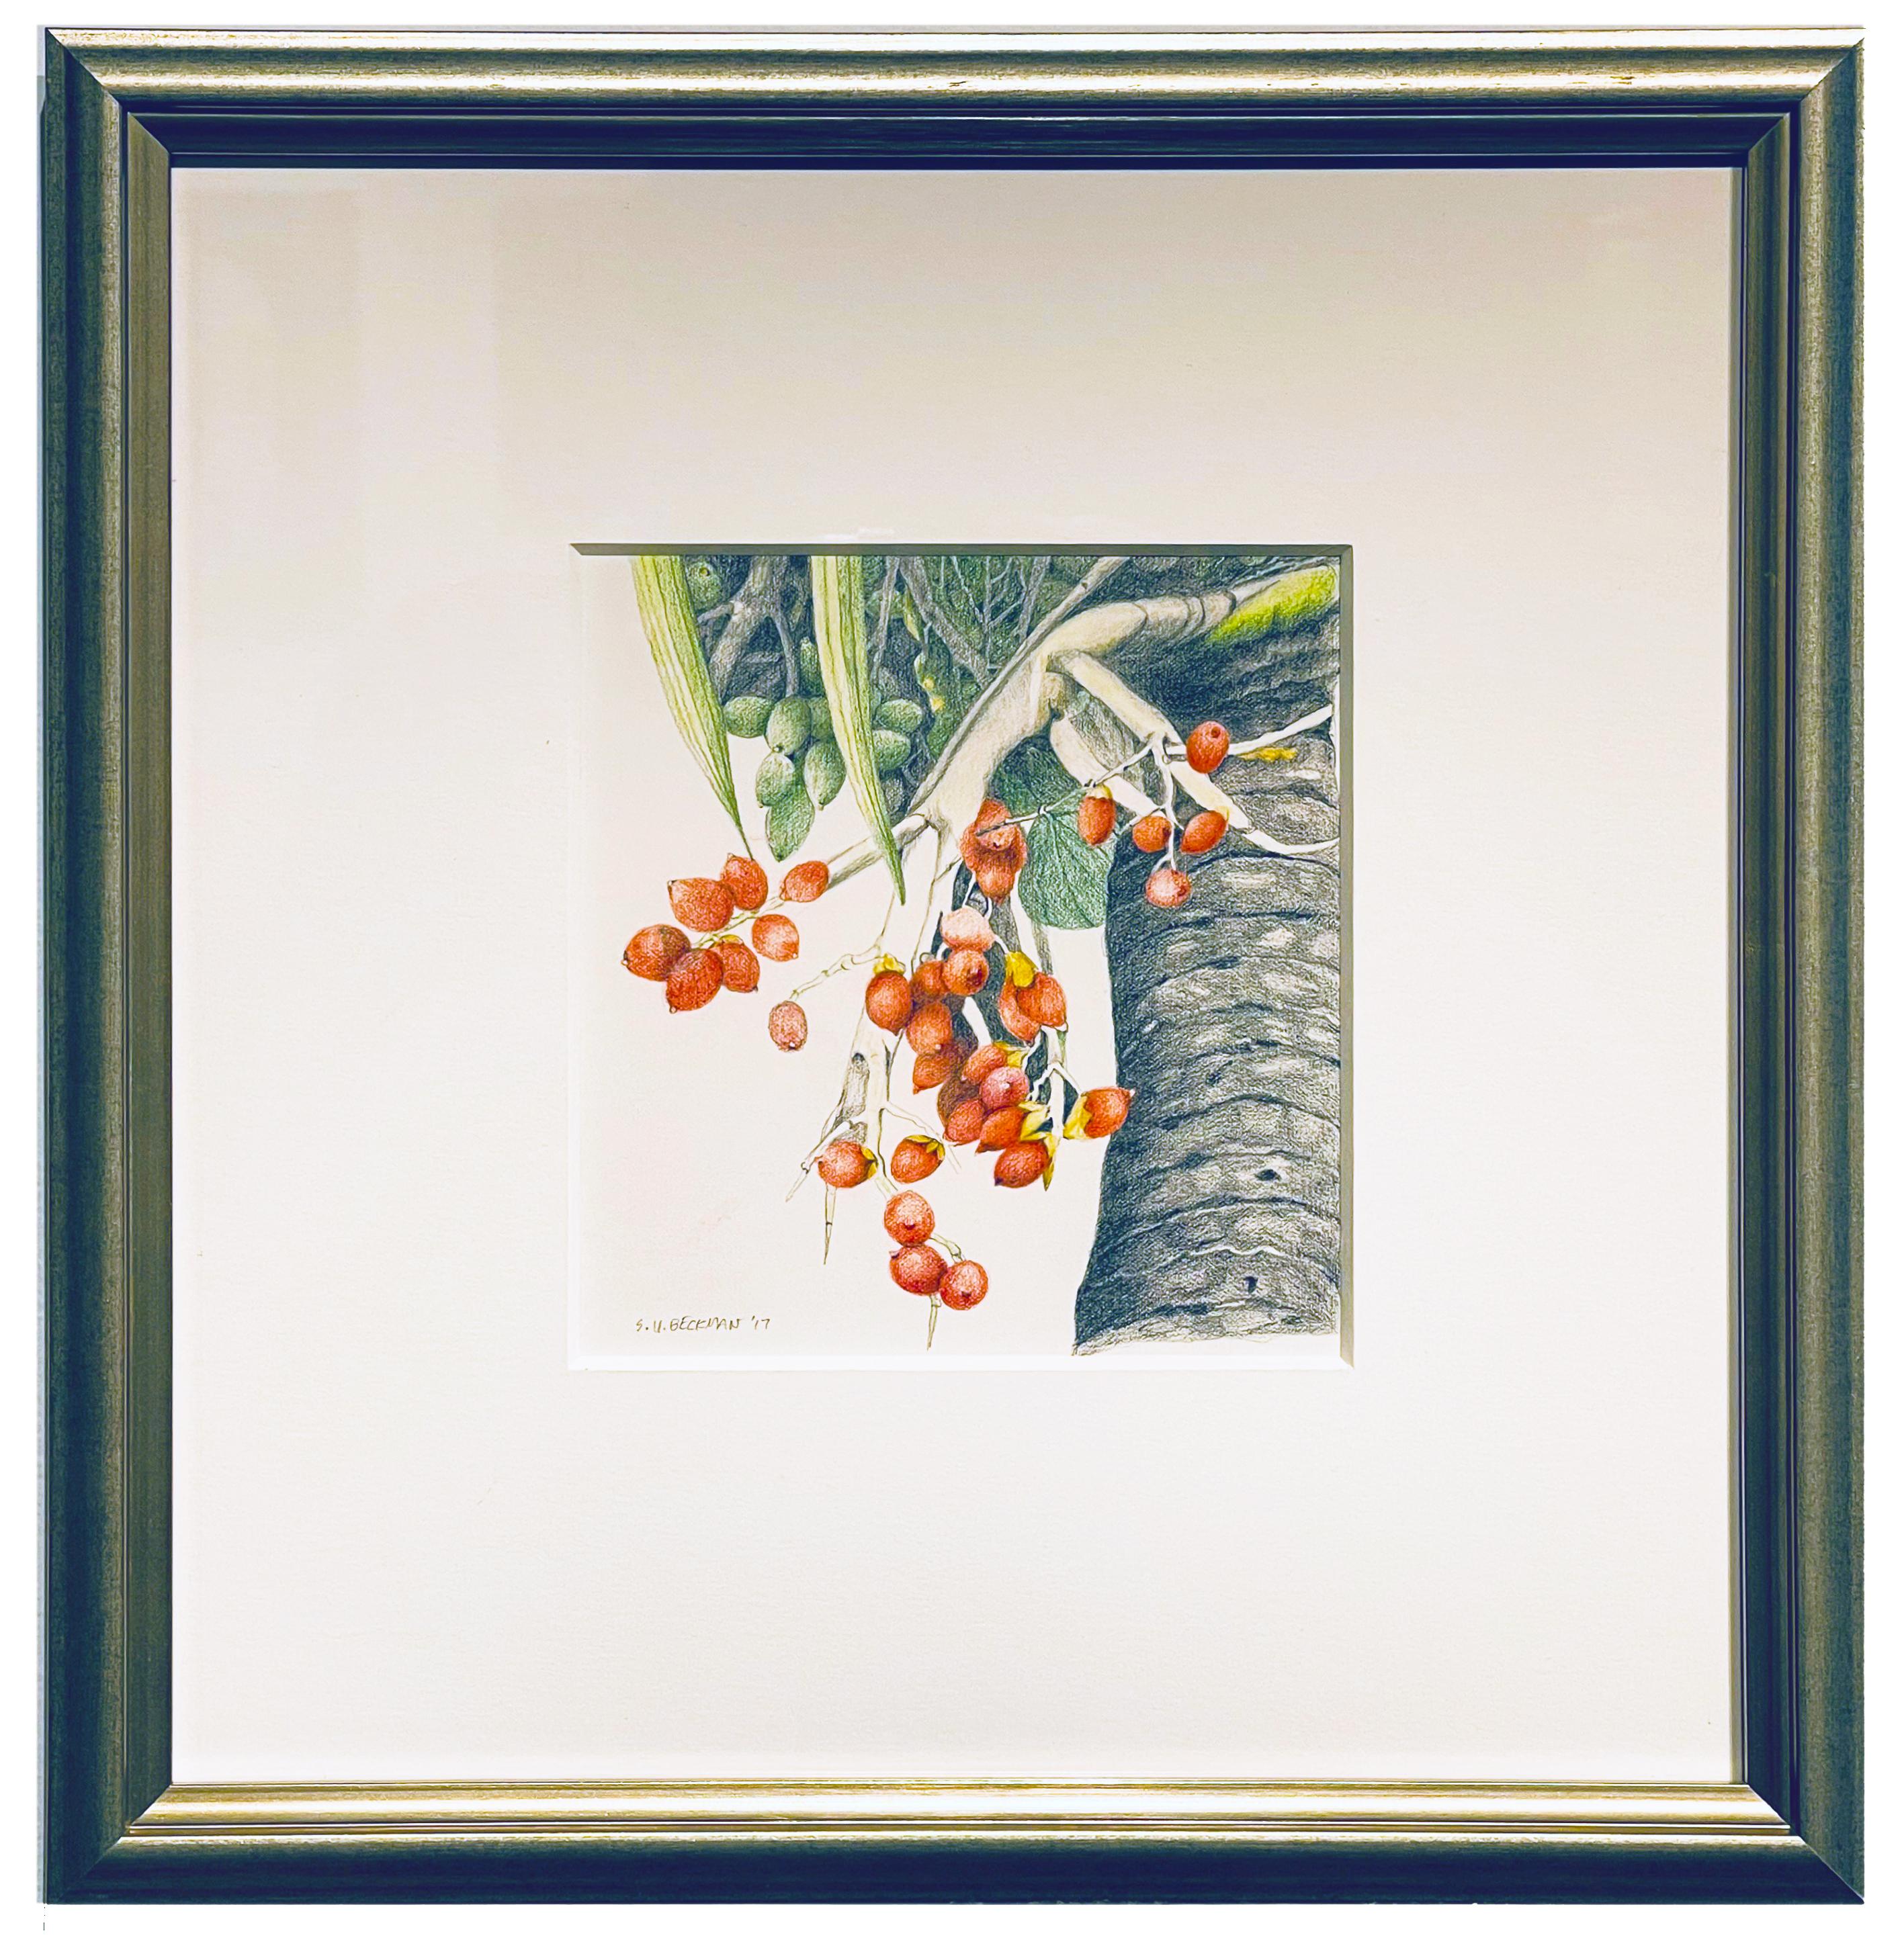 Christmas Palm, Botanical Drawing, Colored Pencil on Paper, Framed in Silver